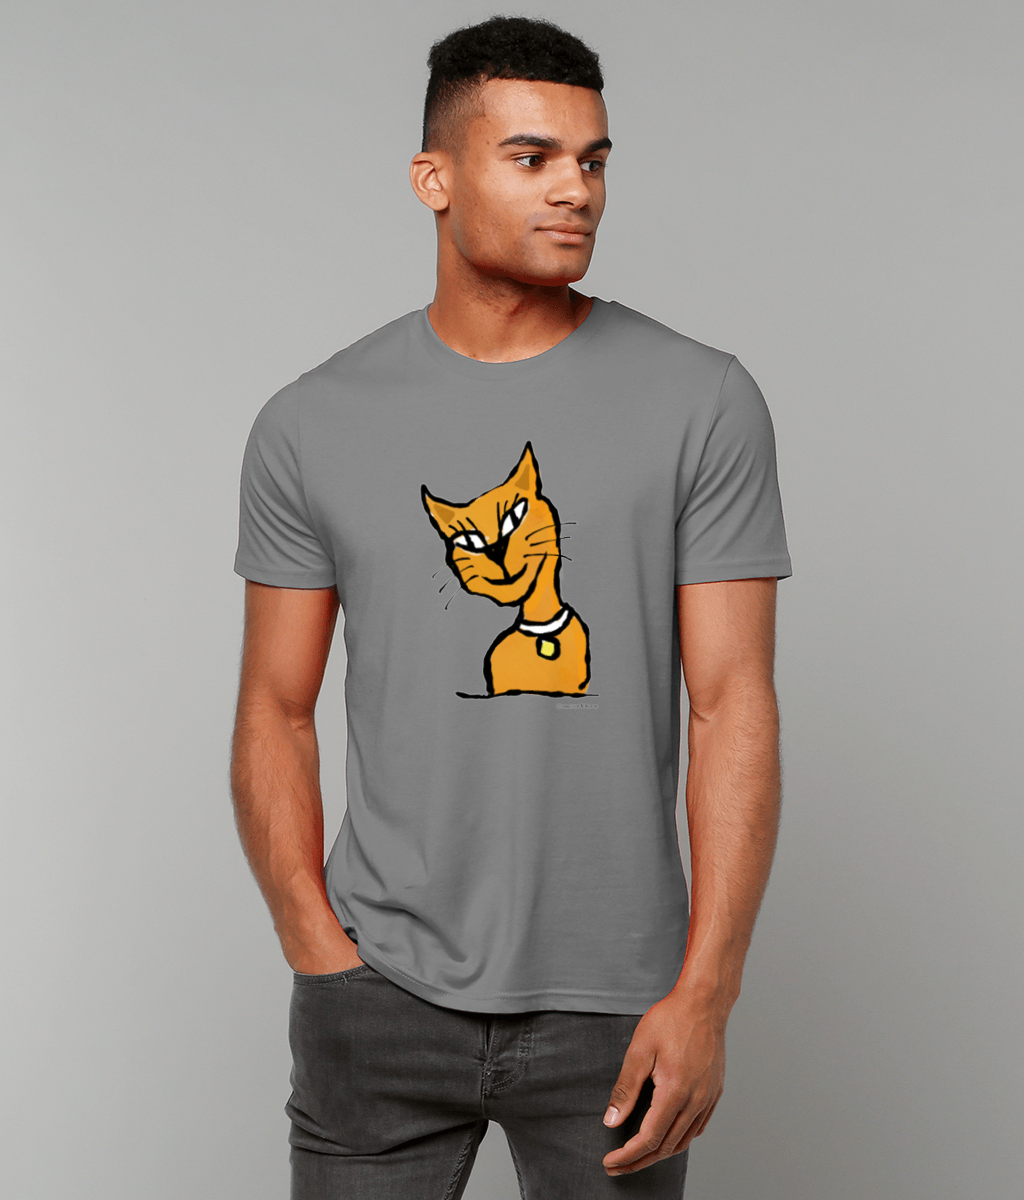 Ginger Cat T-shirt - Young man wearing an Illustrated grey colour vegan cotton Cat T-shirt by Hector and Bone